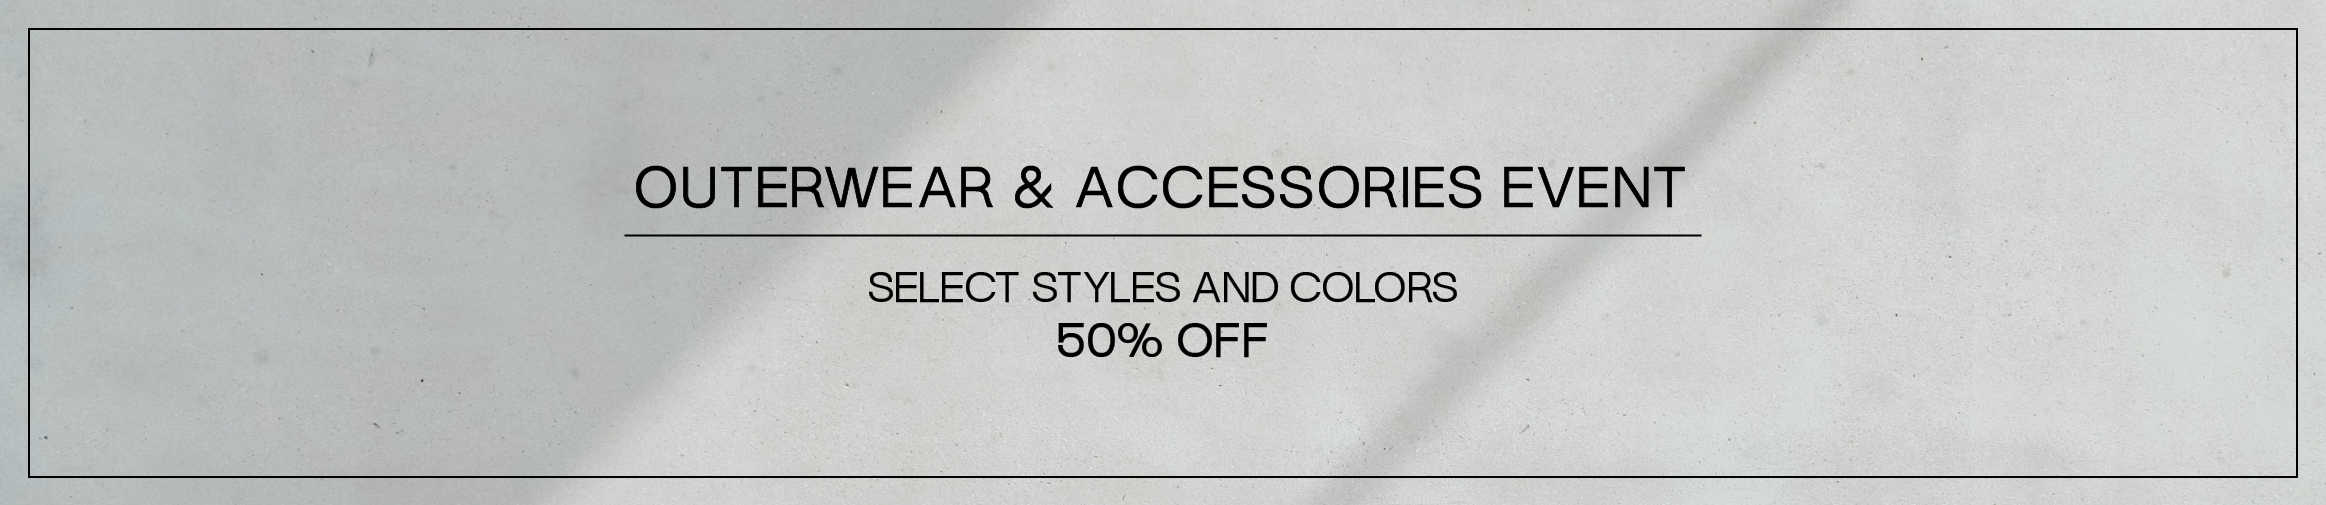 Outerwear & Accessory Event 50% off